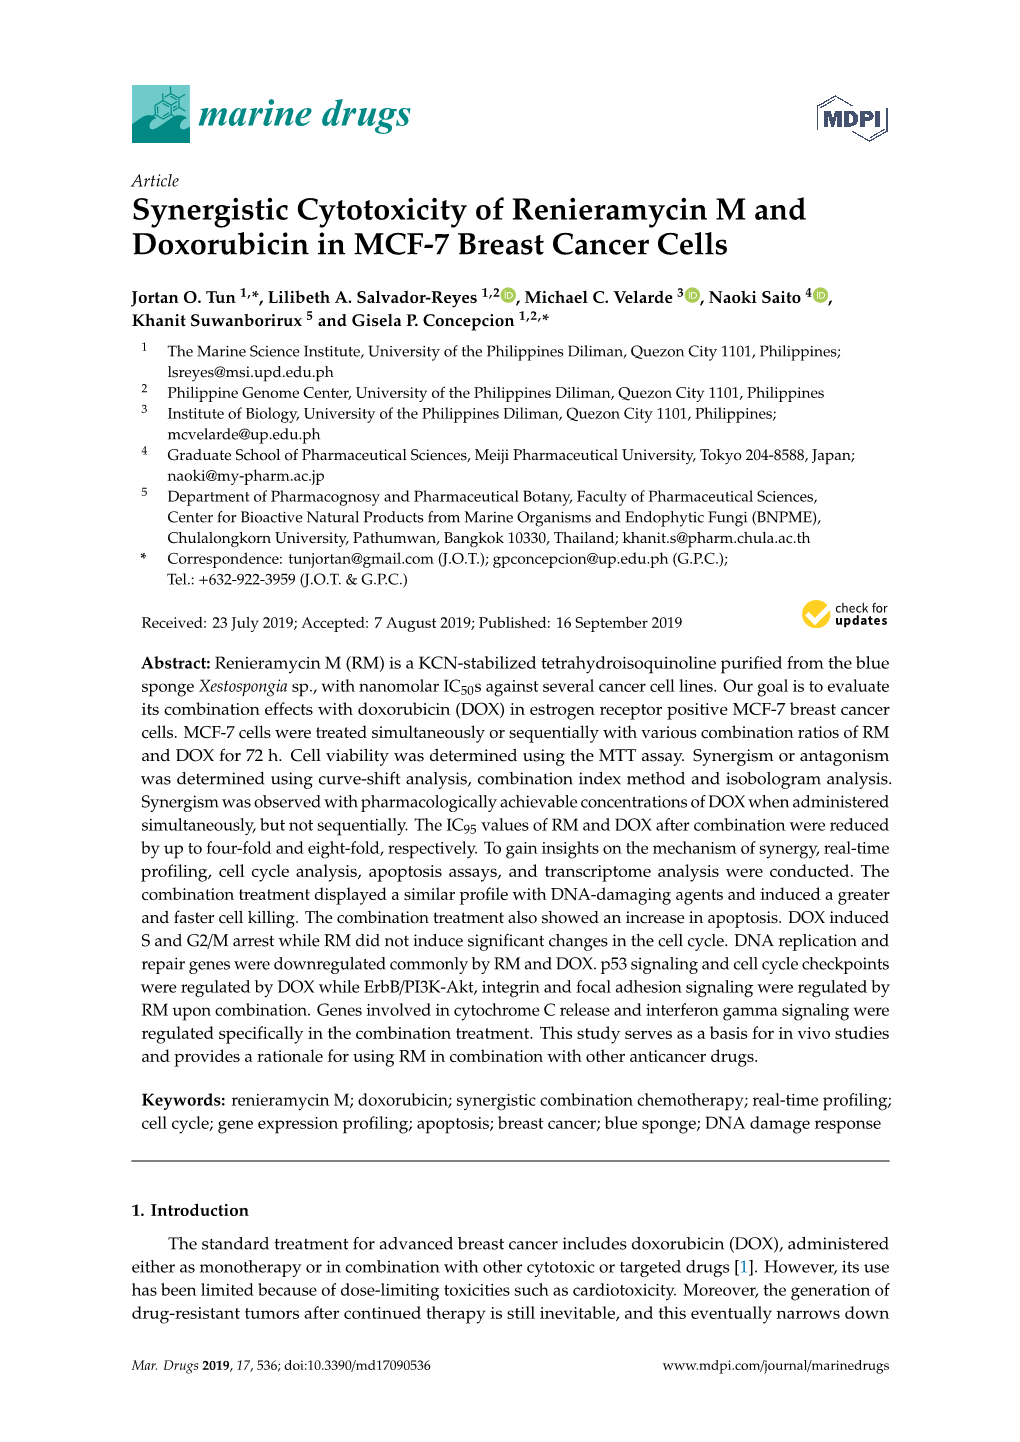 Synergistic Cytotoxicity of Renieramycin M and Doxorubicin in MCF-7 Breast Cancer Cells